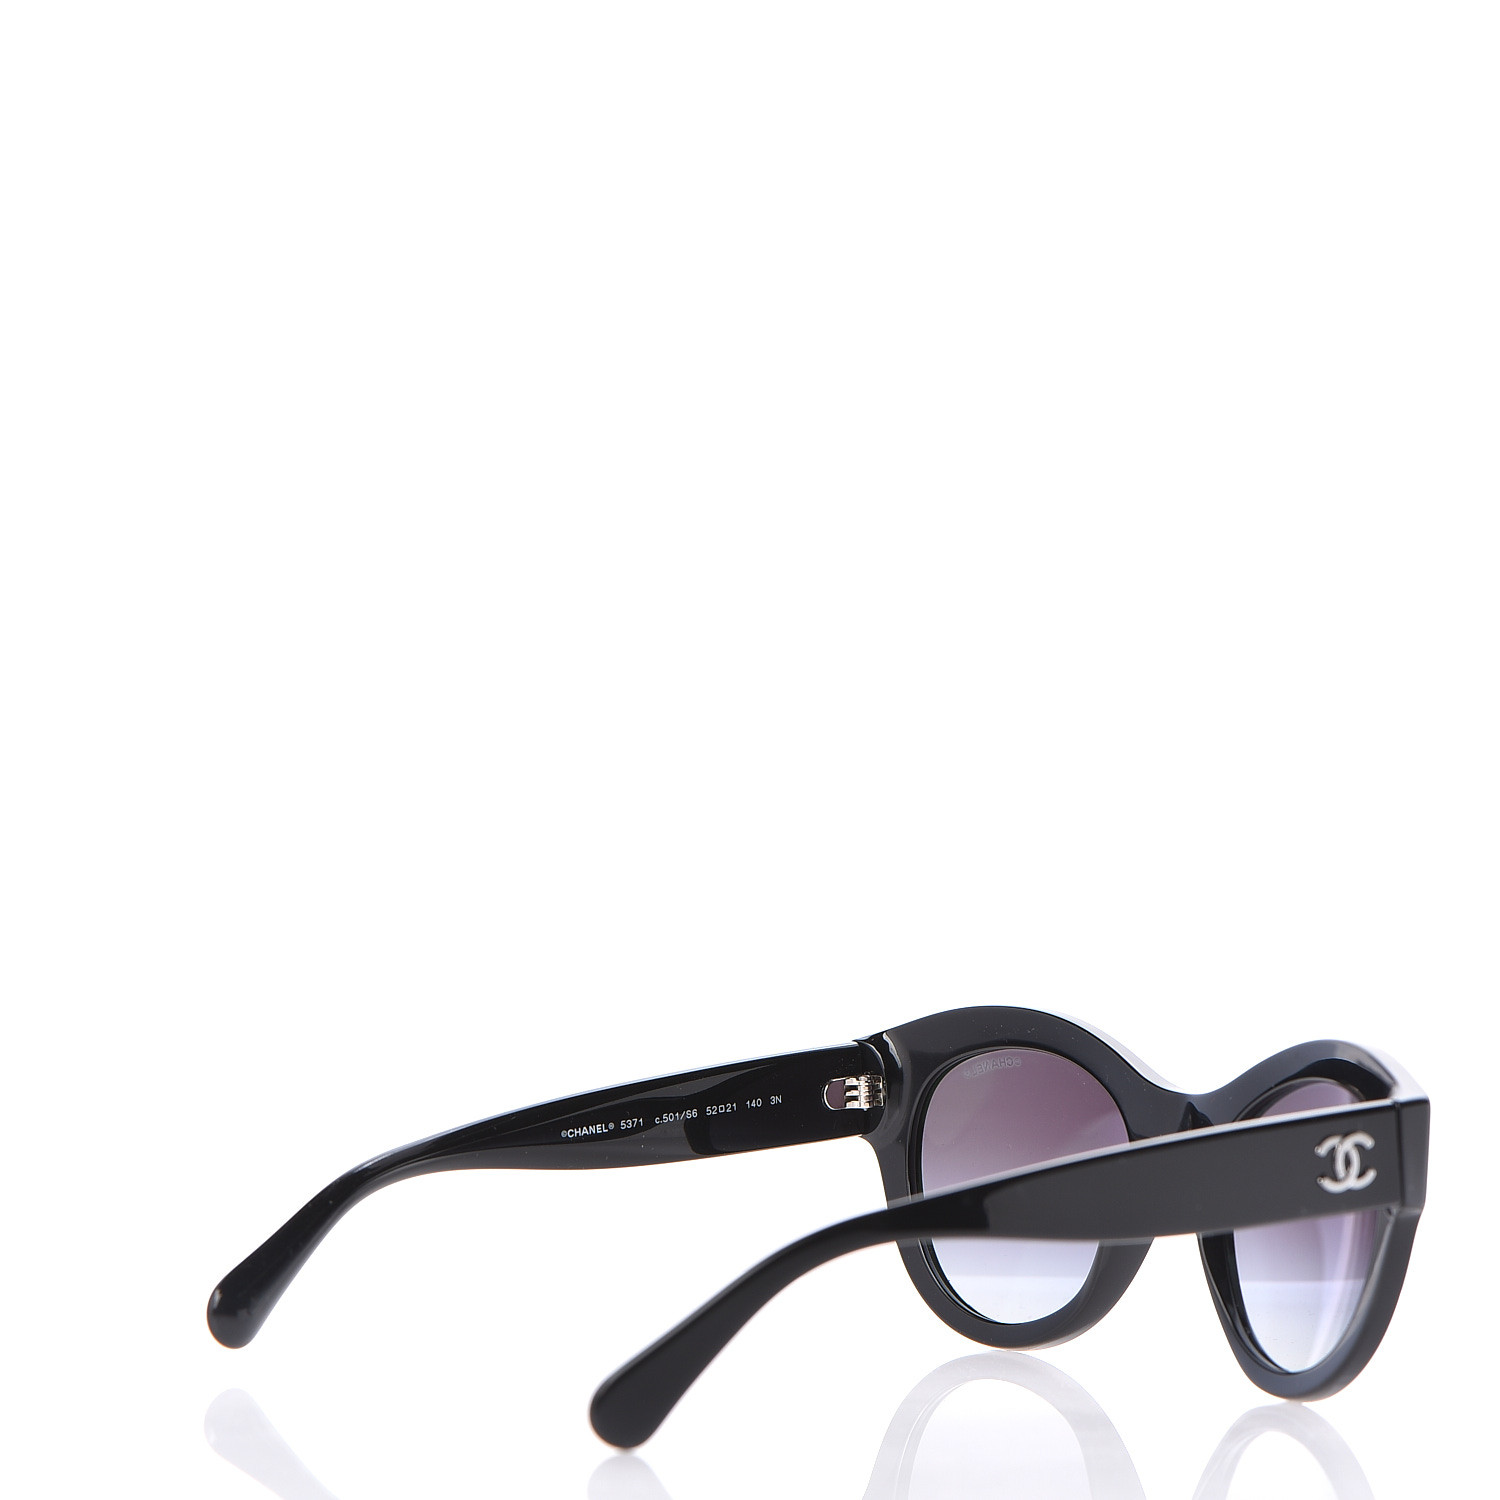 CHANEL Acetate Butterfly Sunglasses 5371 Black 495997 | FASHIONPHILE